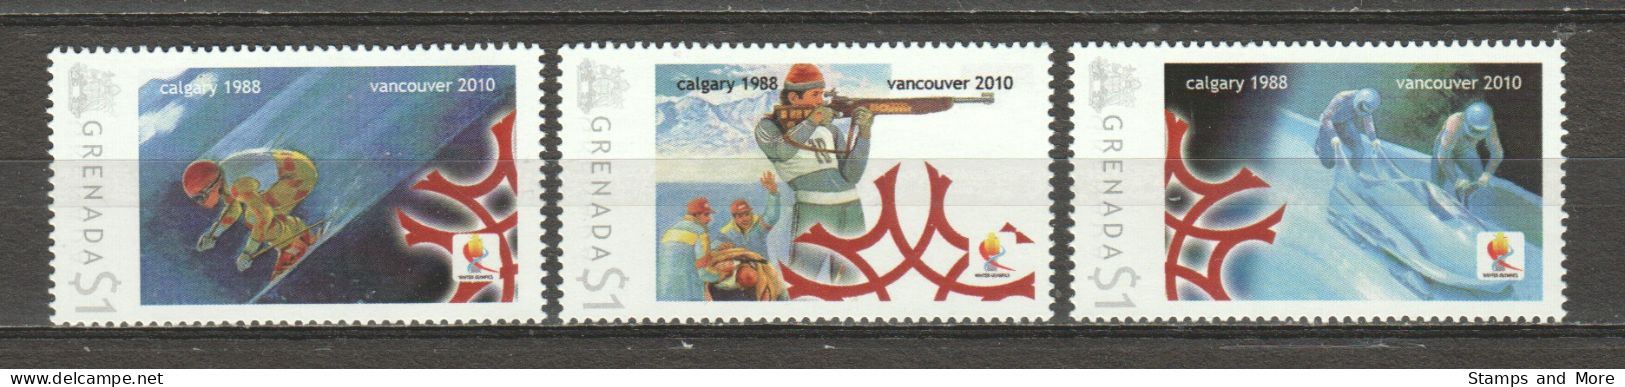 Grenada - Limited Edition Serie 15 MNH - WINTER OLYMPICS VANCOUVER 2010 - CALGARY 1988 - Winter 2010: Vancouver